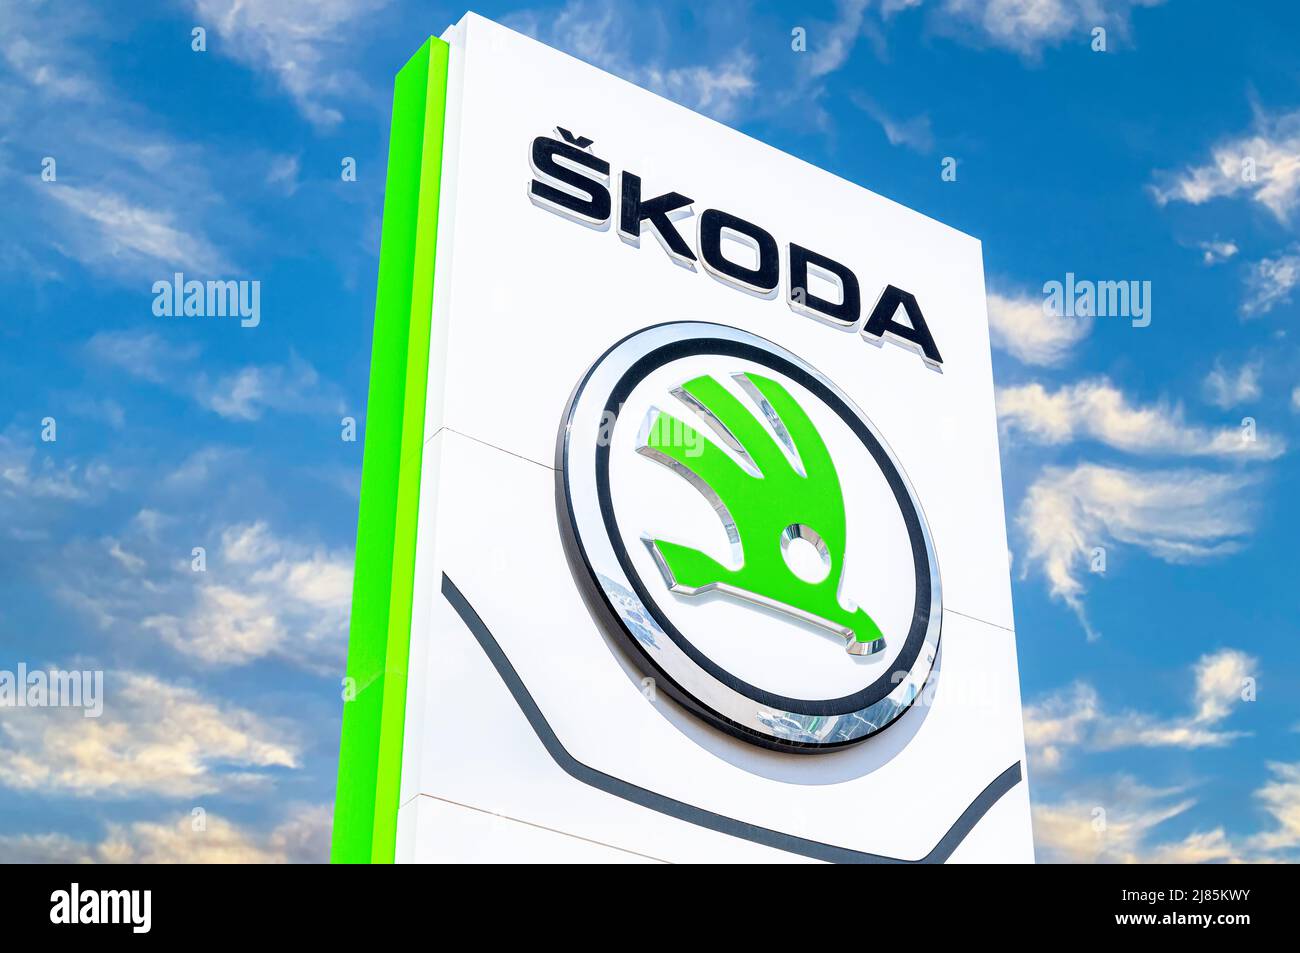 Samara, Russia - May 8, 2022: Skoda dealership signboard against the sky. Skoda Auto is an automobile manufacturer based in the Czech Republic Stock Photo